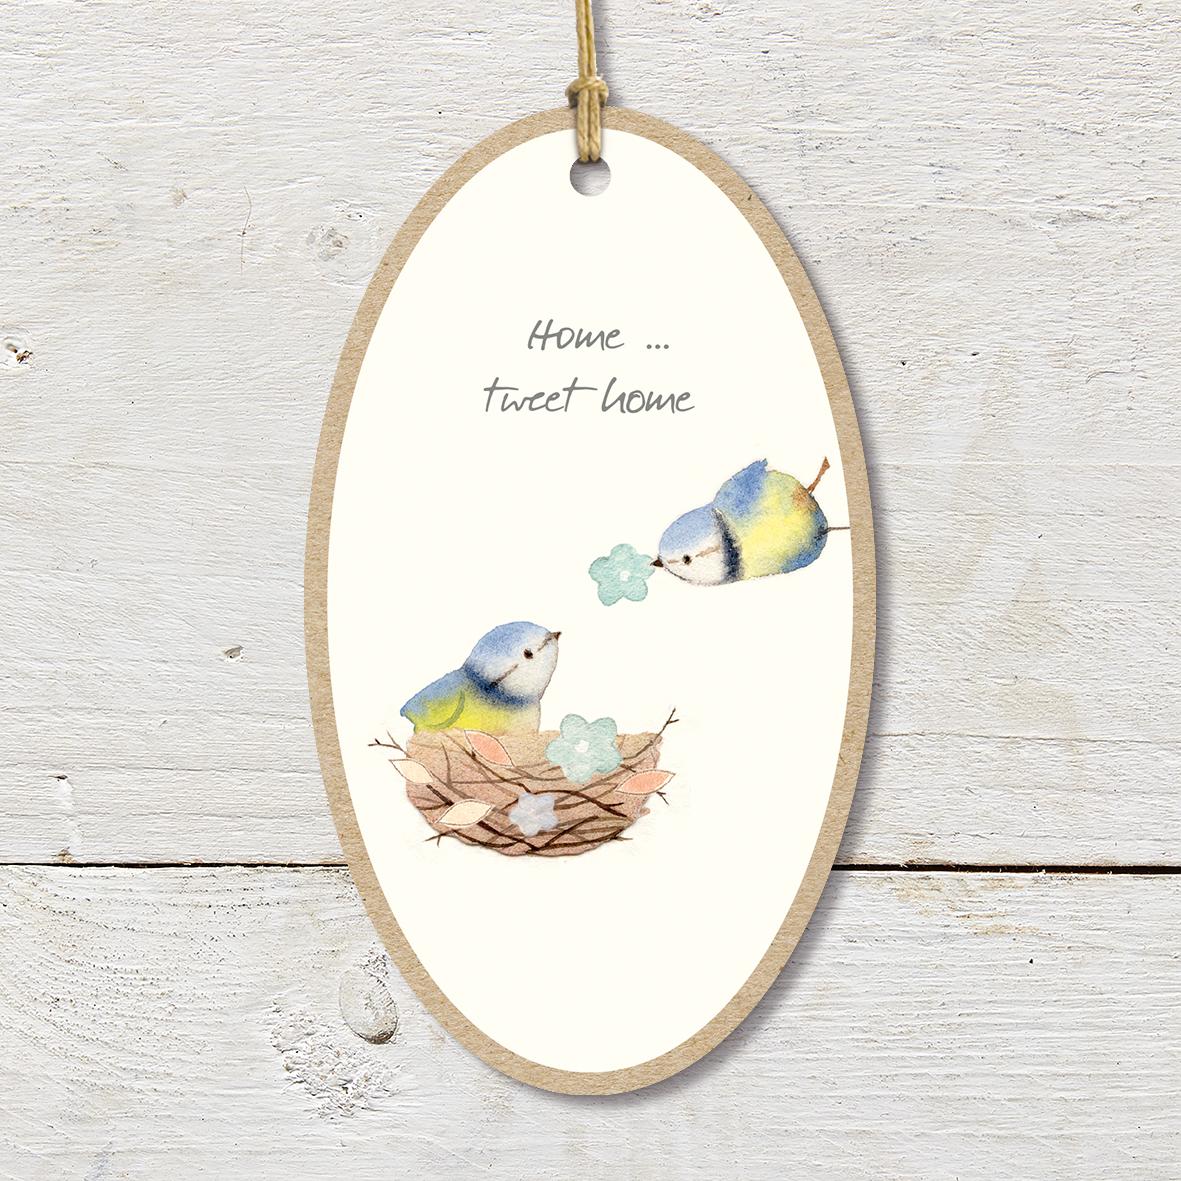 Large Wooden Plaque featuring two cute nesting blue tits with a ’Home… tweet home’ caption.